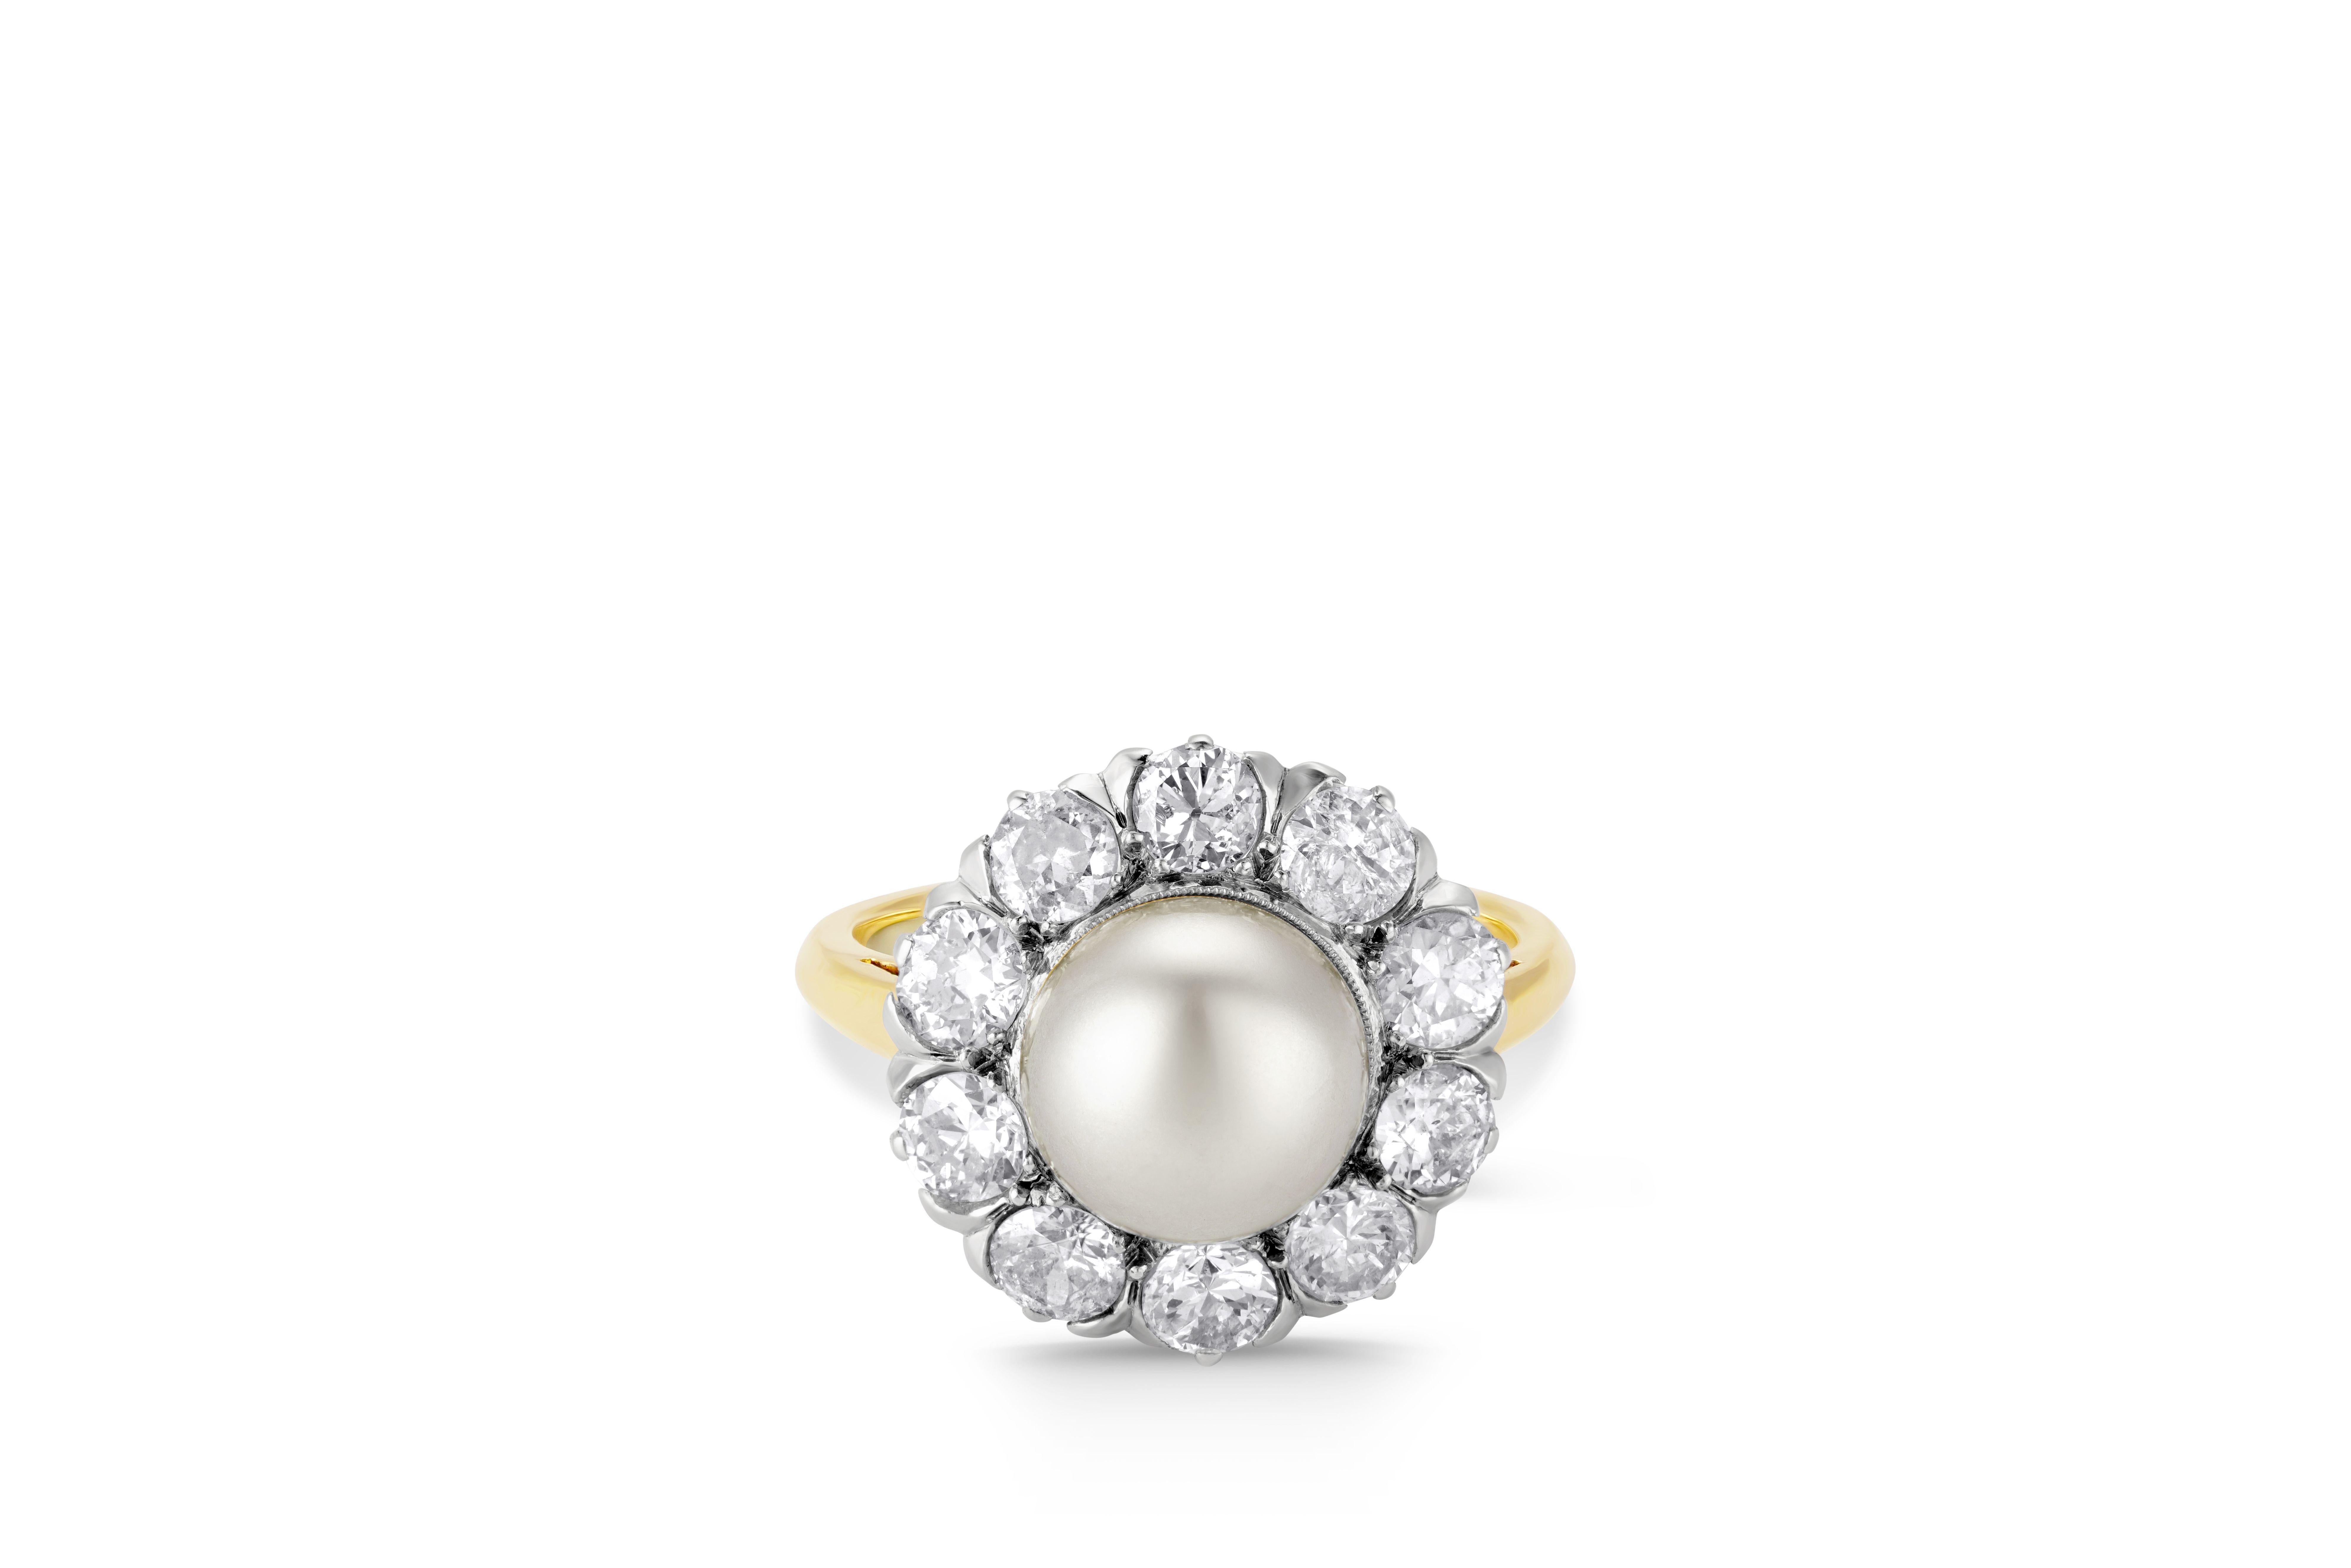 Simply Beautiful! Finely Hand crafted Edwardian 14K Yellow Gold Ring. Centering an 8.5mm Pearl, surrounded by 10 Old European-cut Diamonds, approx. 1.50tcw, Hand set in Silver. Ring size: 5.5, we offer ring resizing. More Beautiful in real time!